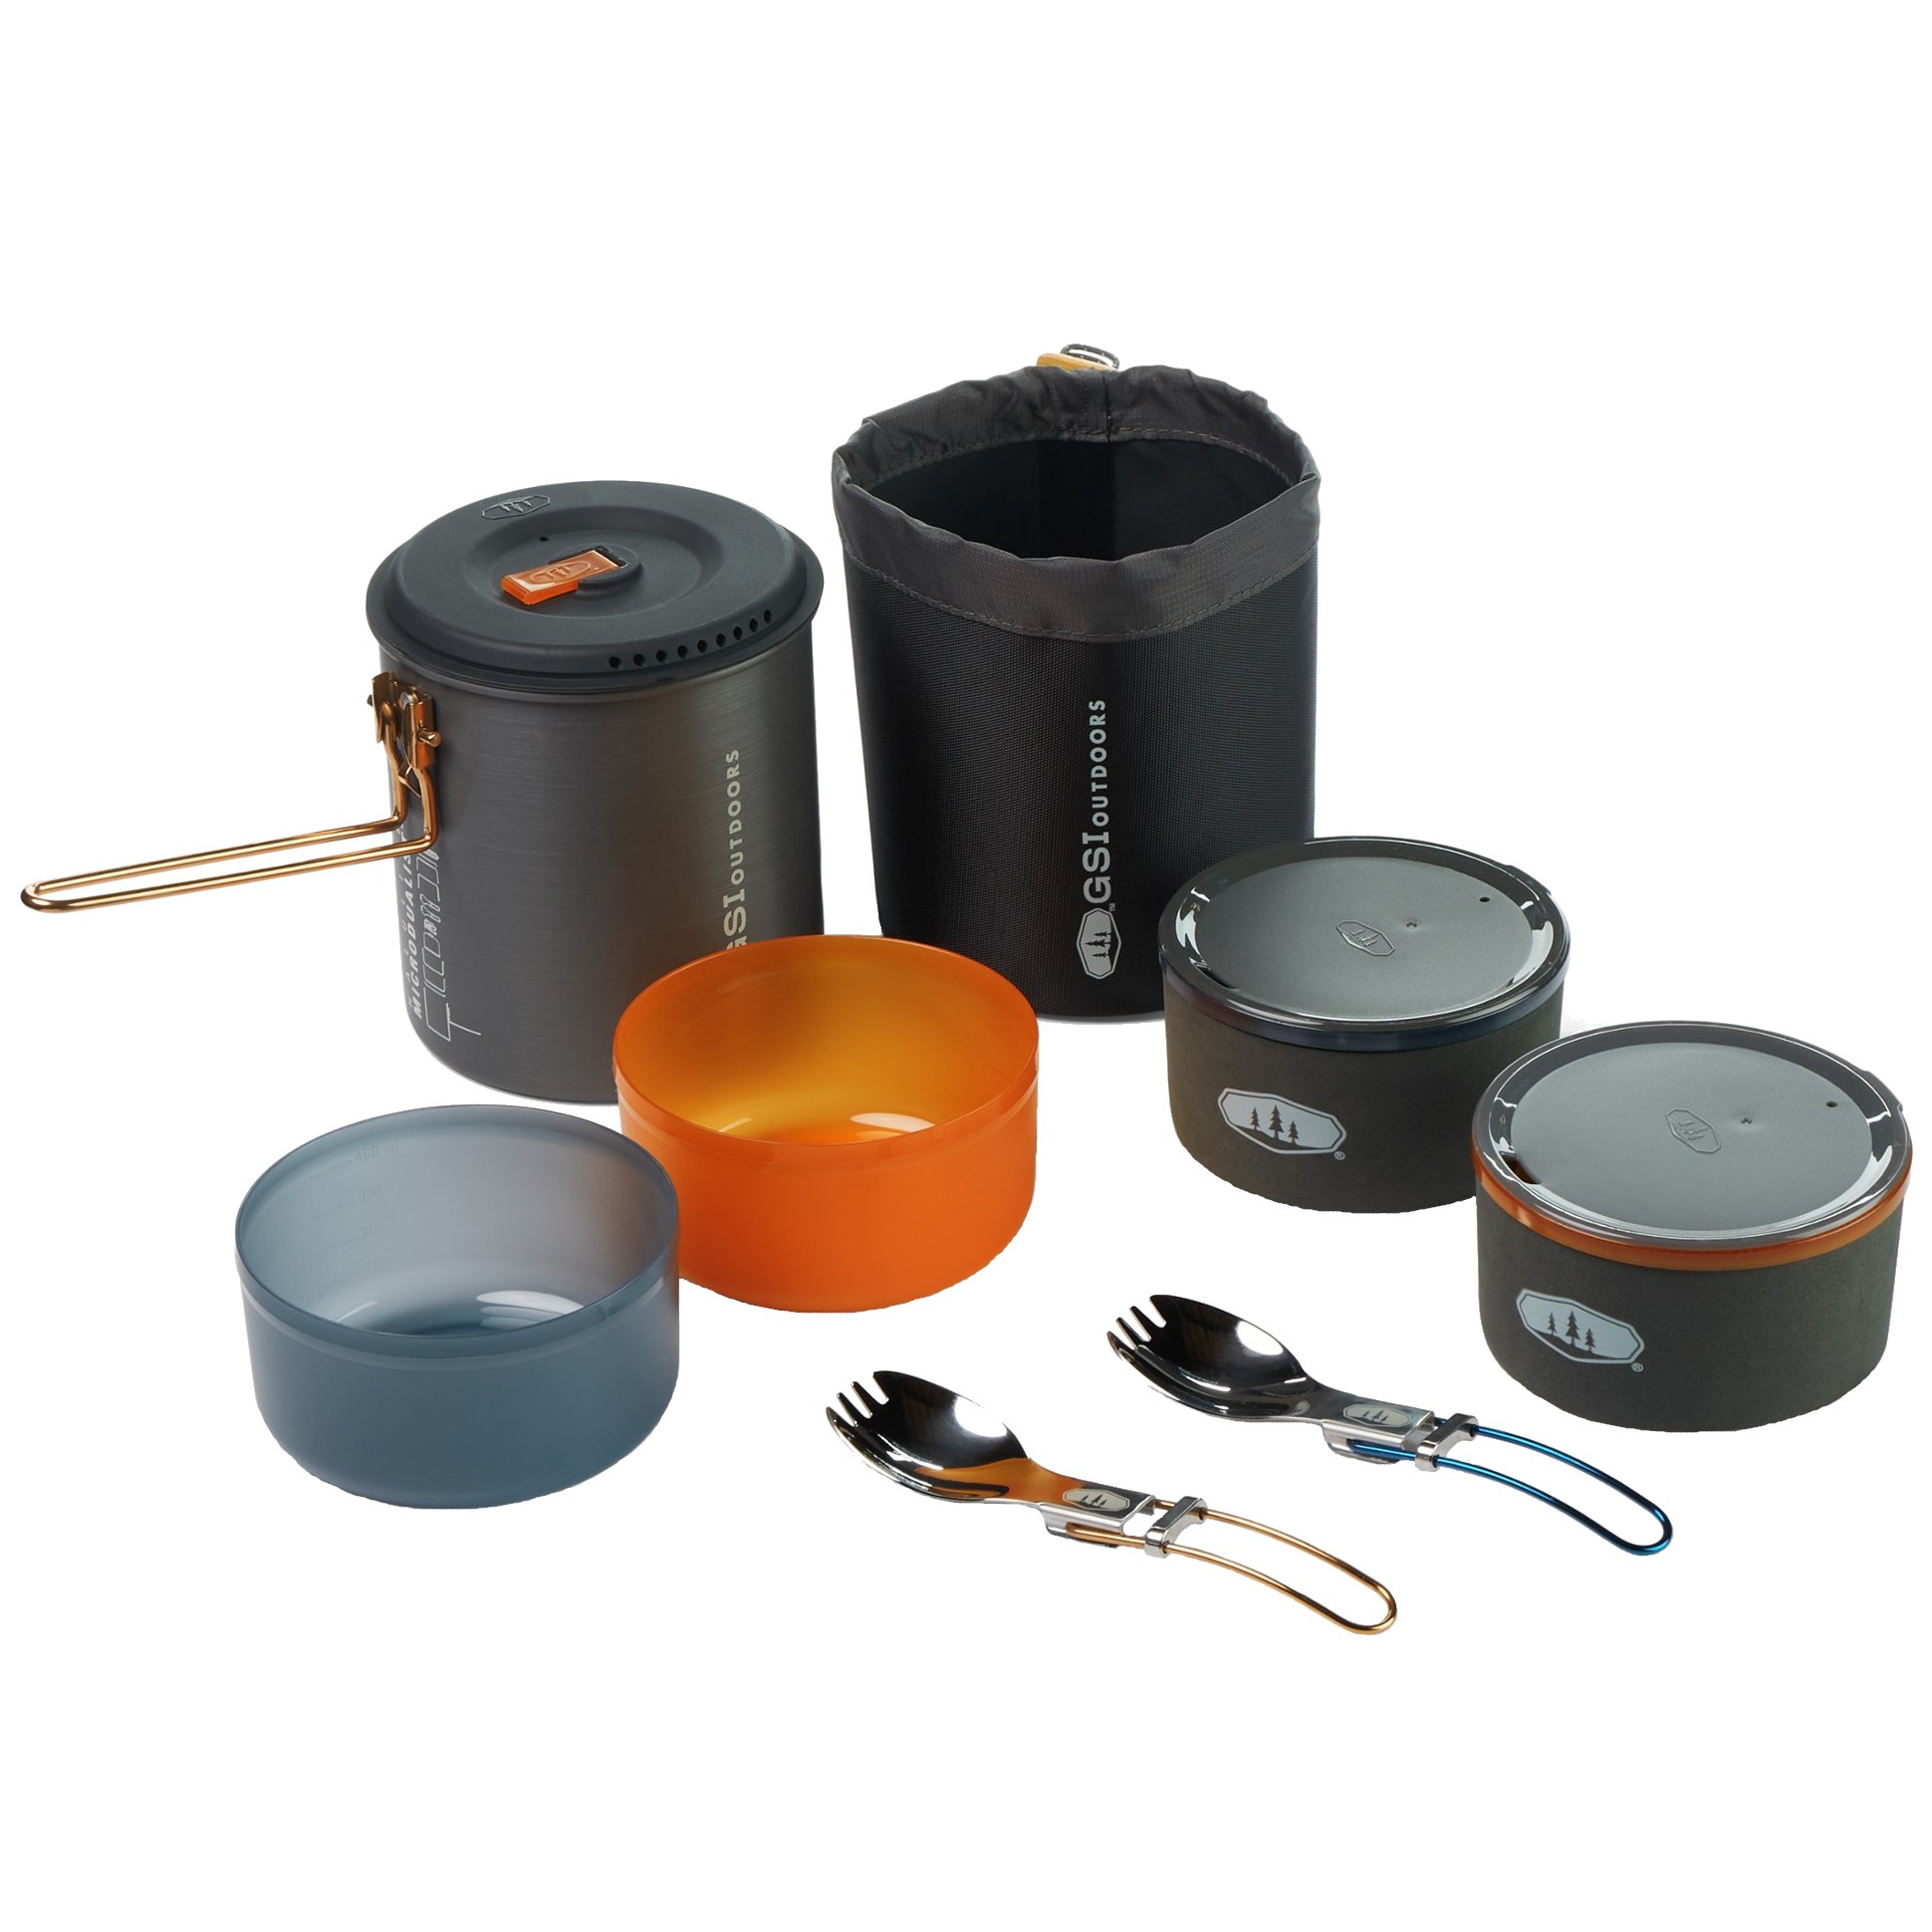 GSI Outdoors Halulite MicroDualist Compact 2-Person Cookset